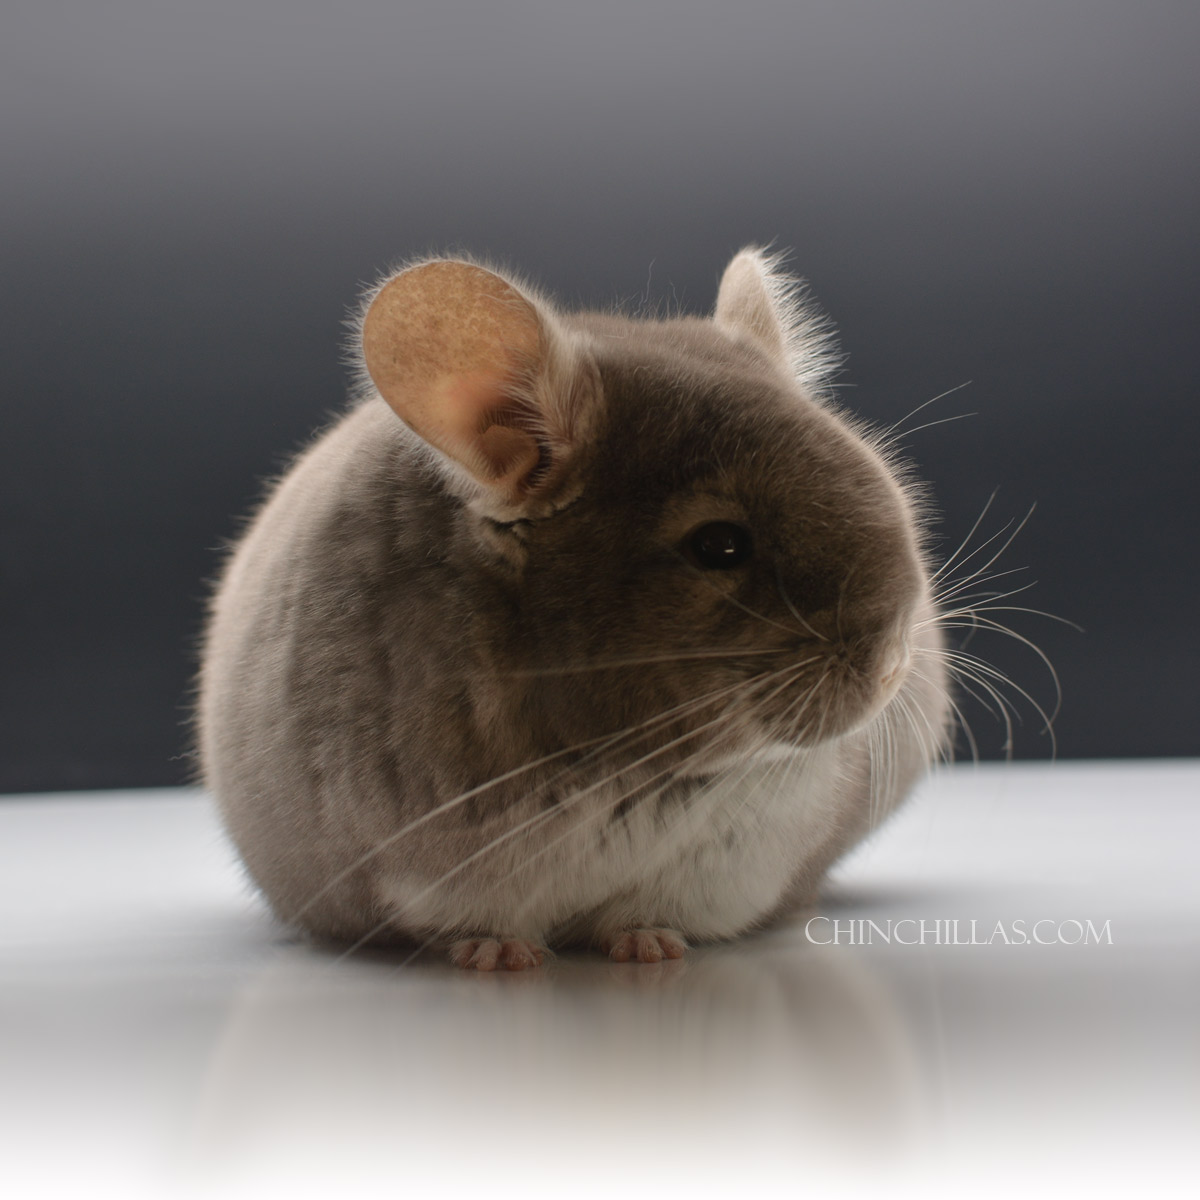 The Touch of Velvet, or TOV was among the first hybrid color mutation chinchillas